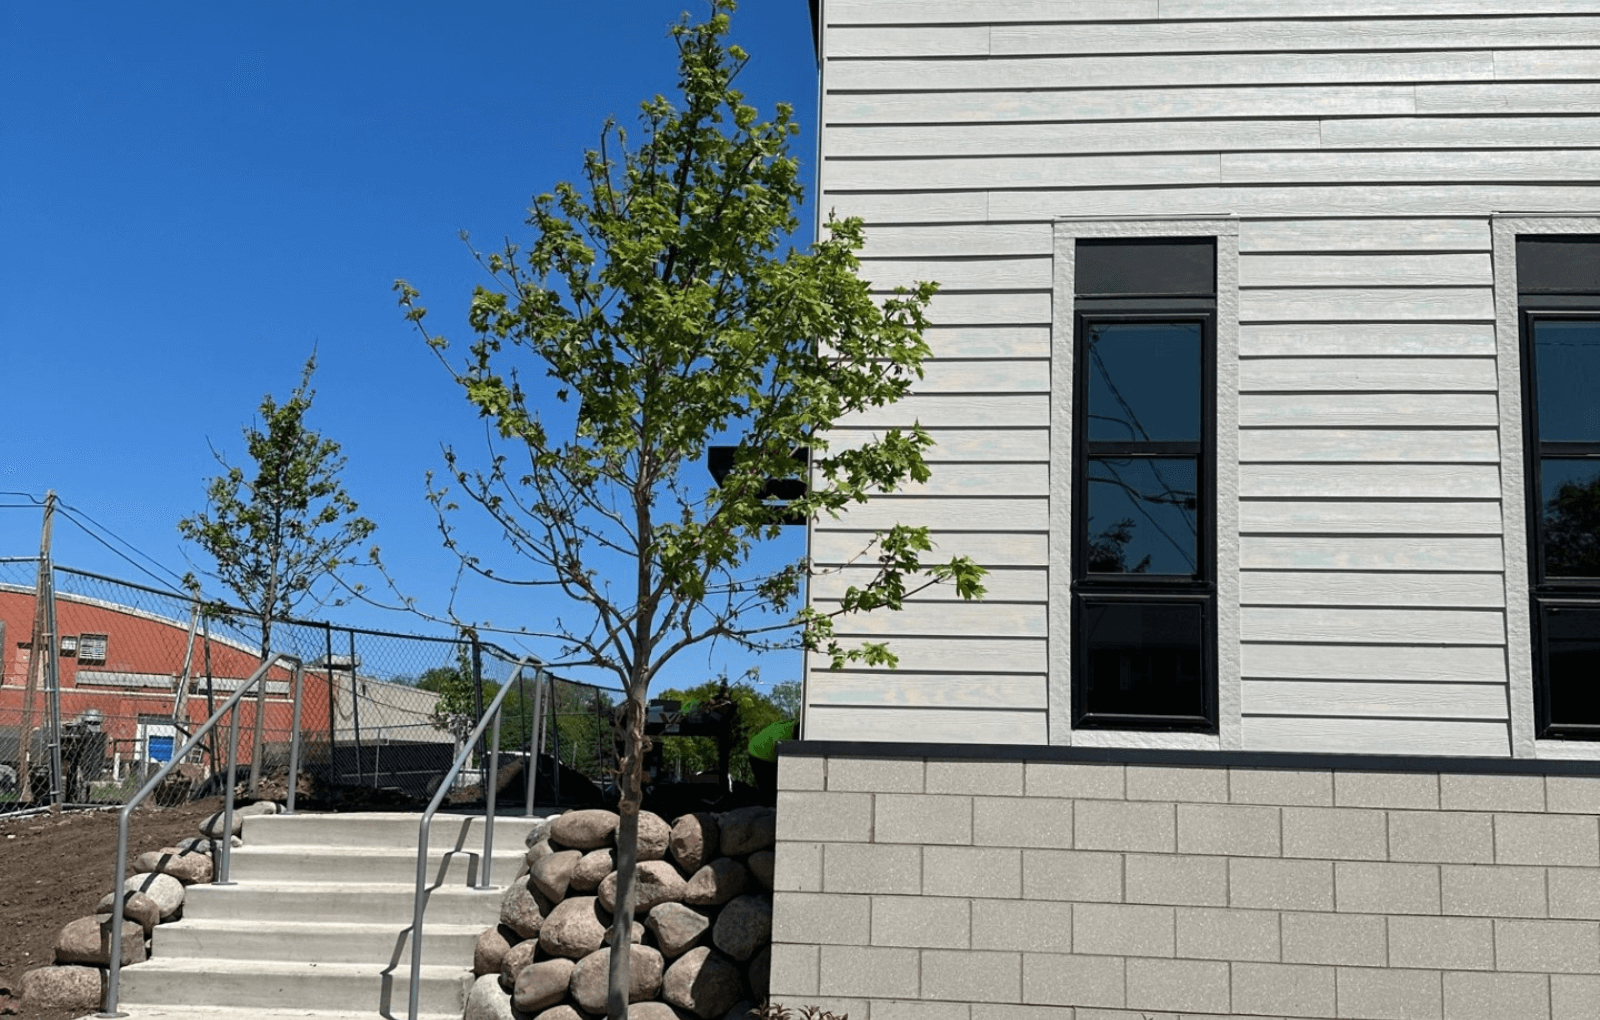 a tree in front of a building